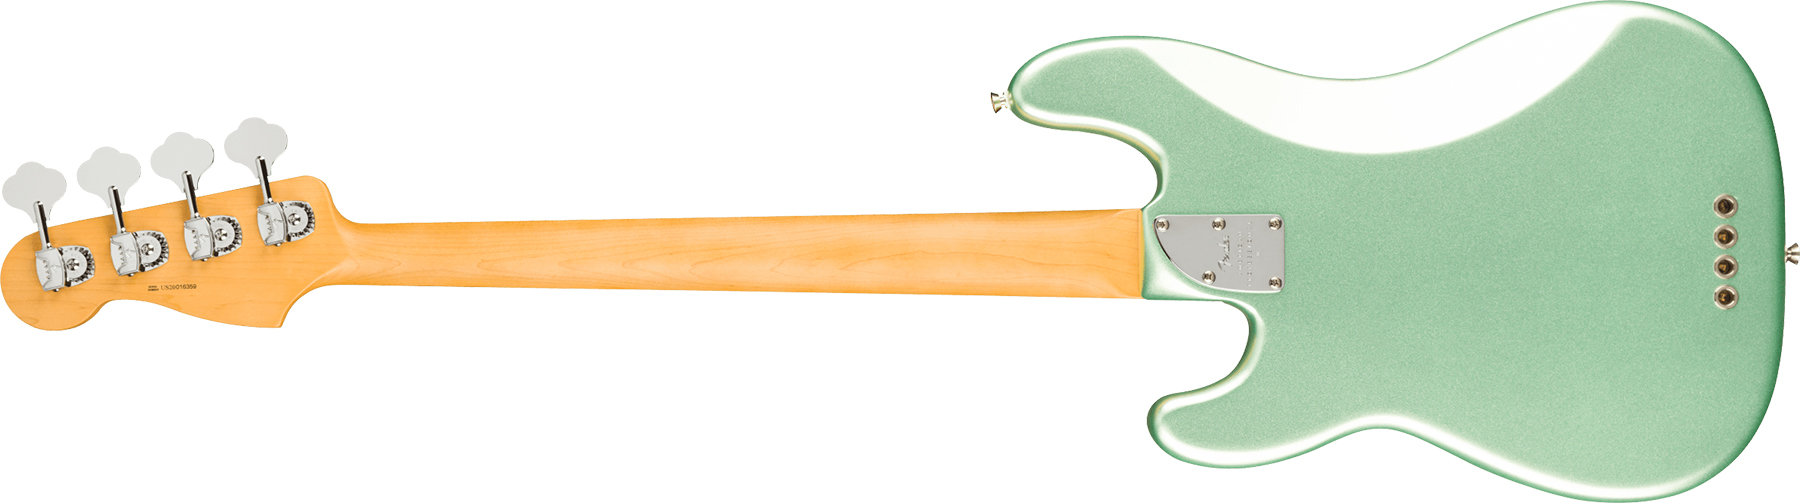 Fender Precision Bass American Professional Ii Usa Rw - Mystic Surf Green - Basse Électrique Solid Body - Variation 1